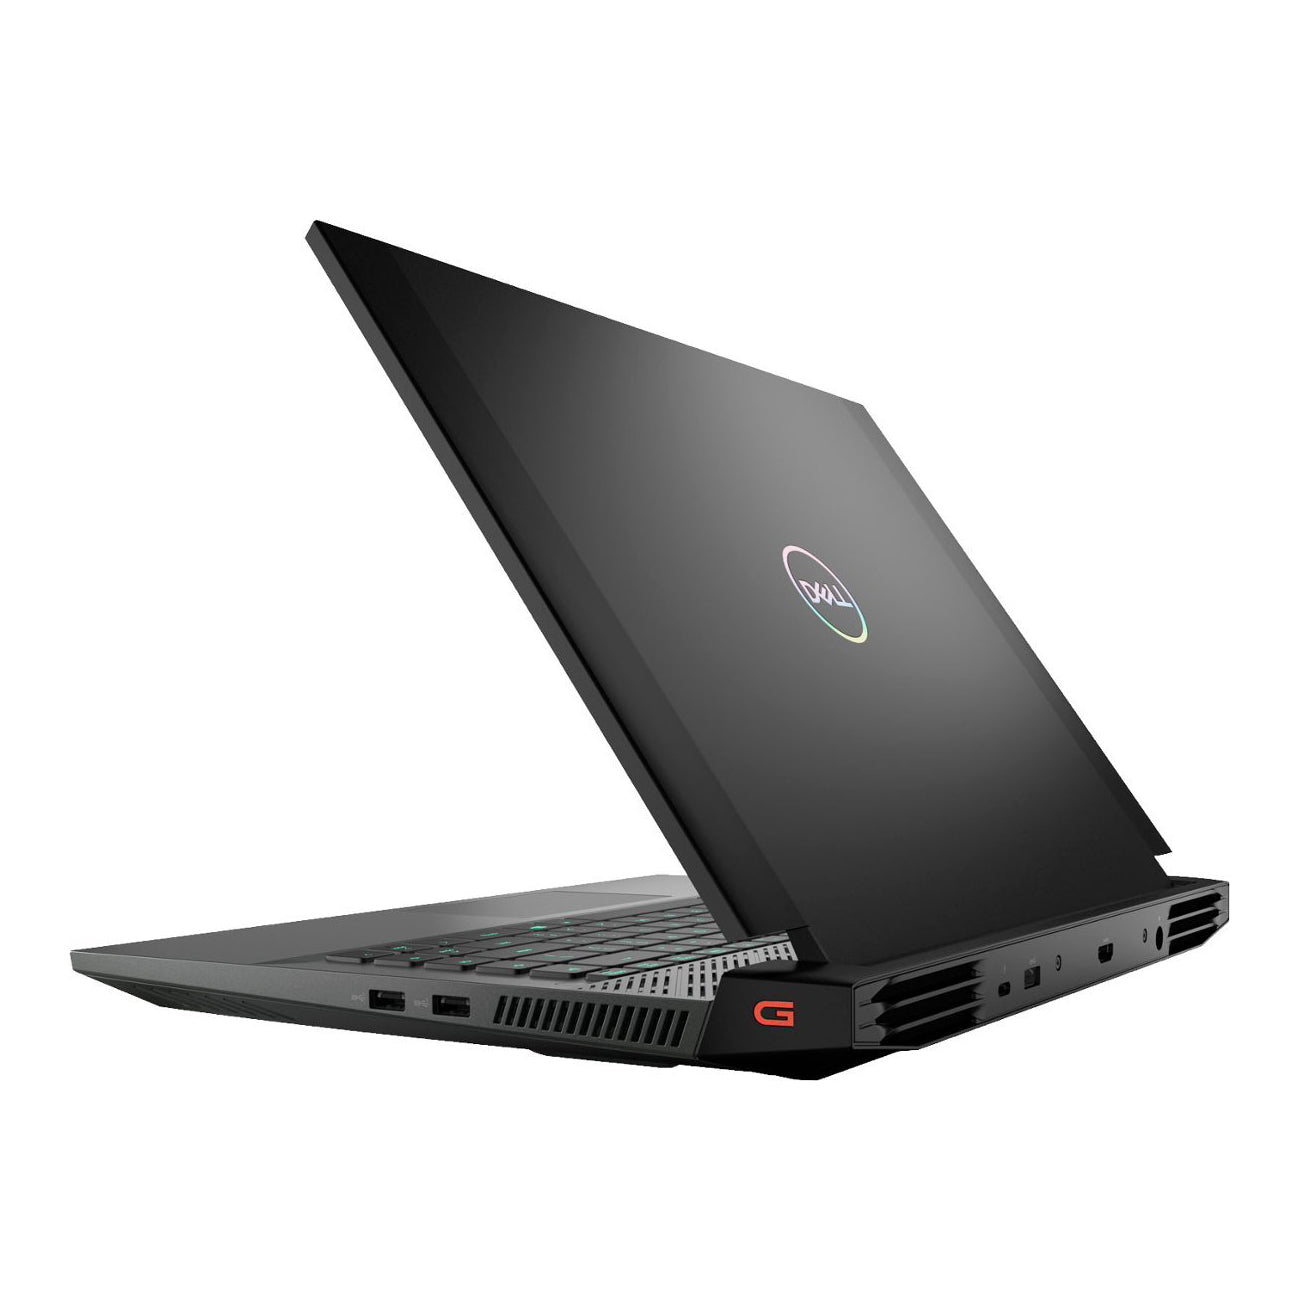 Dell G16 G7620-7775BLK-PUS Core i7-12700h RTX 3060 165hz Qhd+ Gaming Laptop (Brand New) Gaming laptop, Graphic Design laptop, best laptop for gaming, best laptop for graphic design, computer for sale Lebanon, laptop for video editing in Lebanon, laptop for sale Lebanon, best graphic design laptop,	best video editing laptop, best programming laptop, laptop for sale in Lebanon, laptops for sale in Lebanon, laptop for sale in Lebanon, buy computer Lebanon, buy laptop Lebanon.